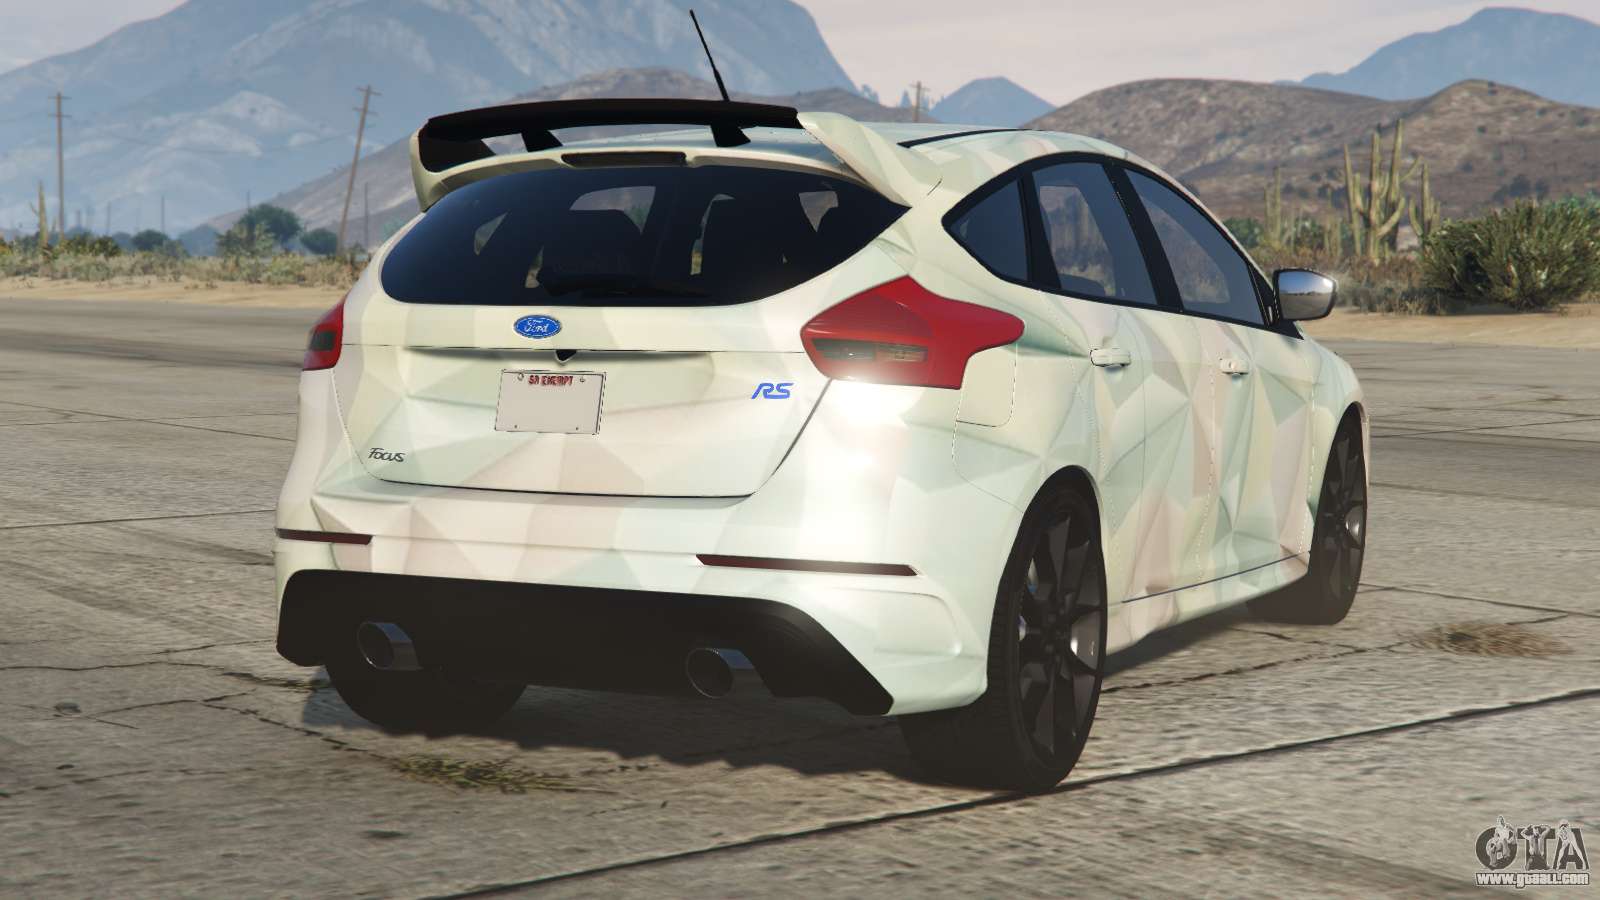 Ford Focus RS Nebula for GTA 5